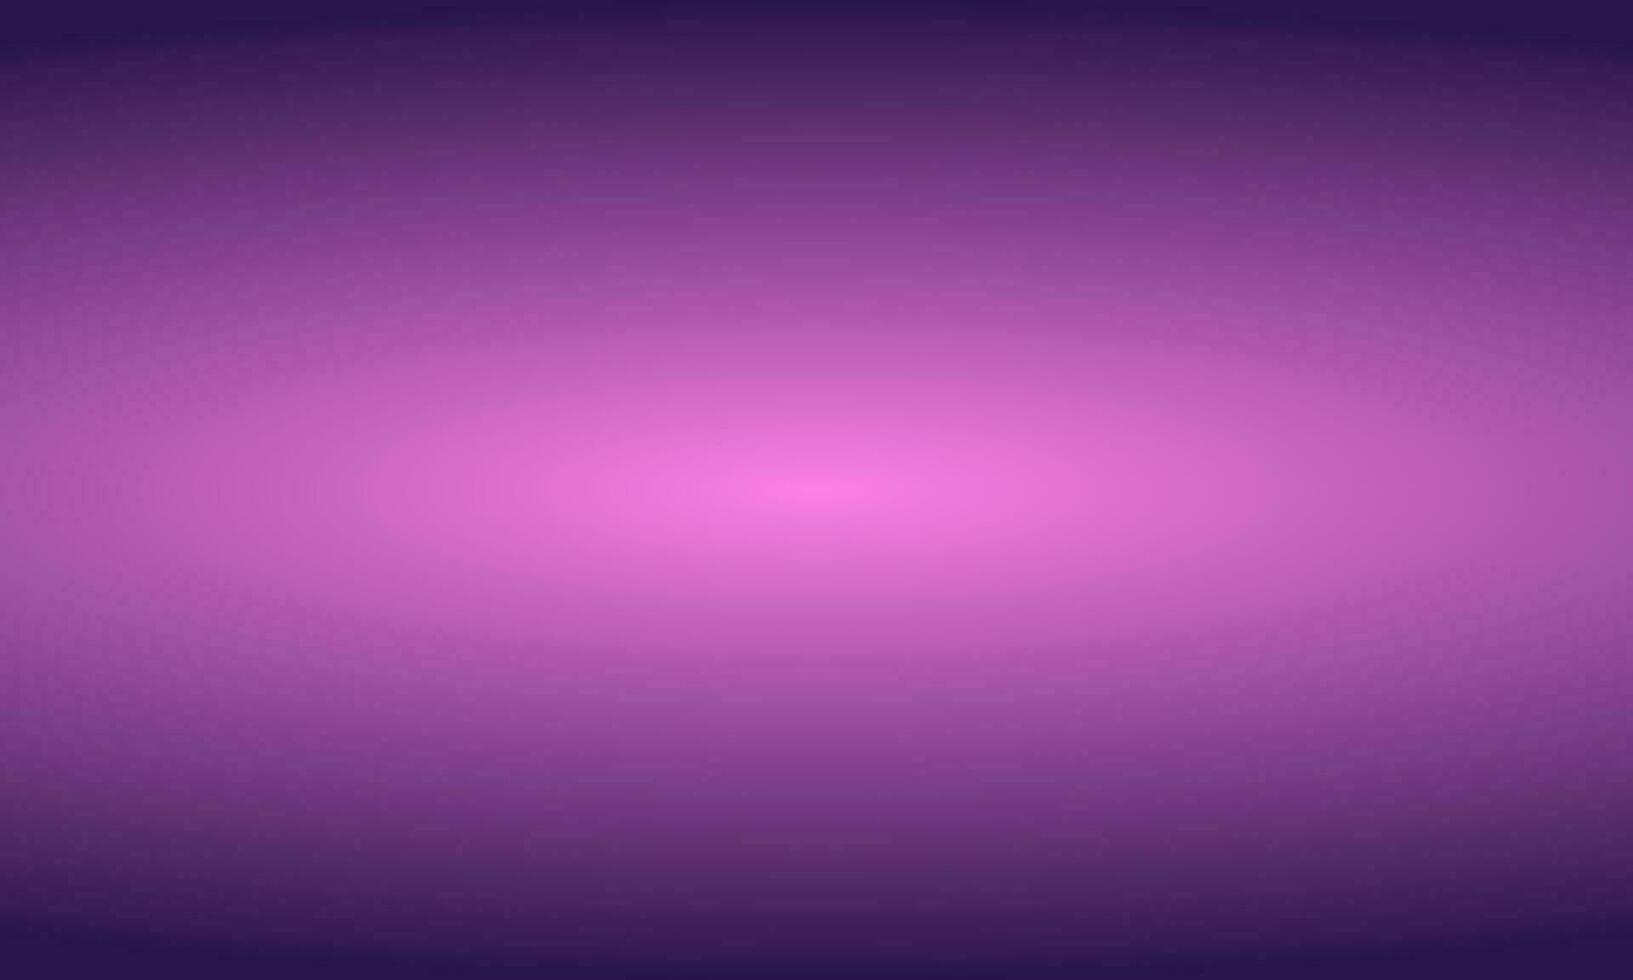 abstract gradient radial background on purple and violet colors. simple smooth graphic design wallpaper template. suitable vector for digital, decoration, backdrop, banner